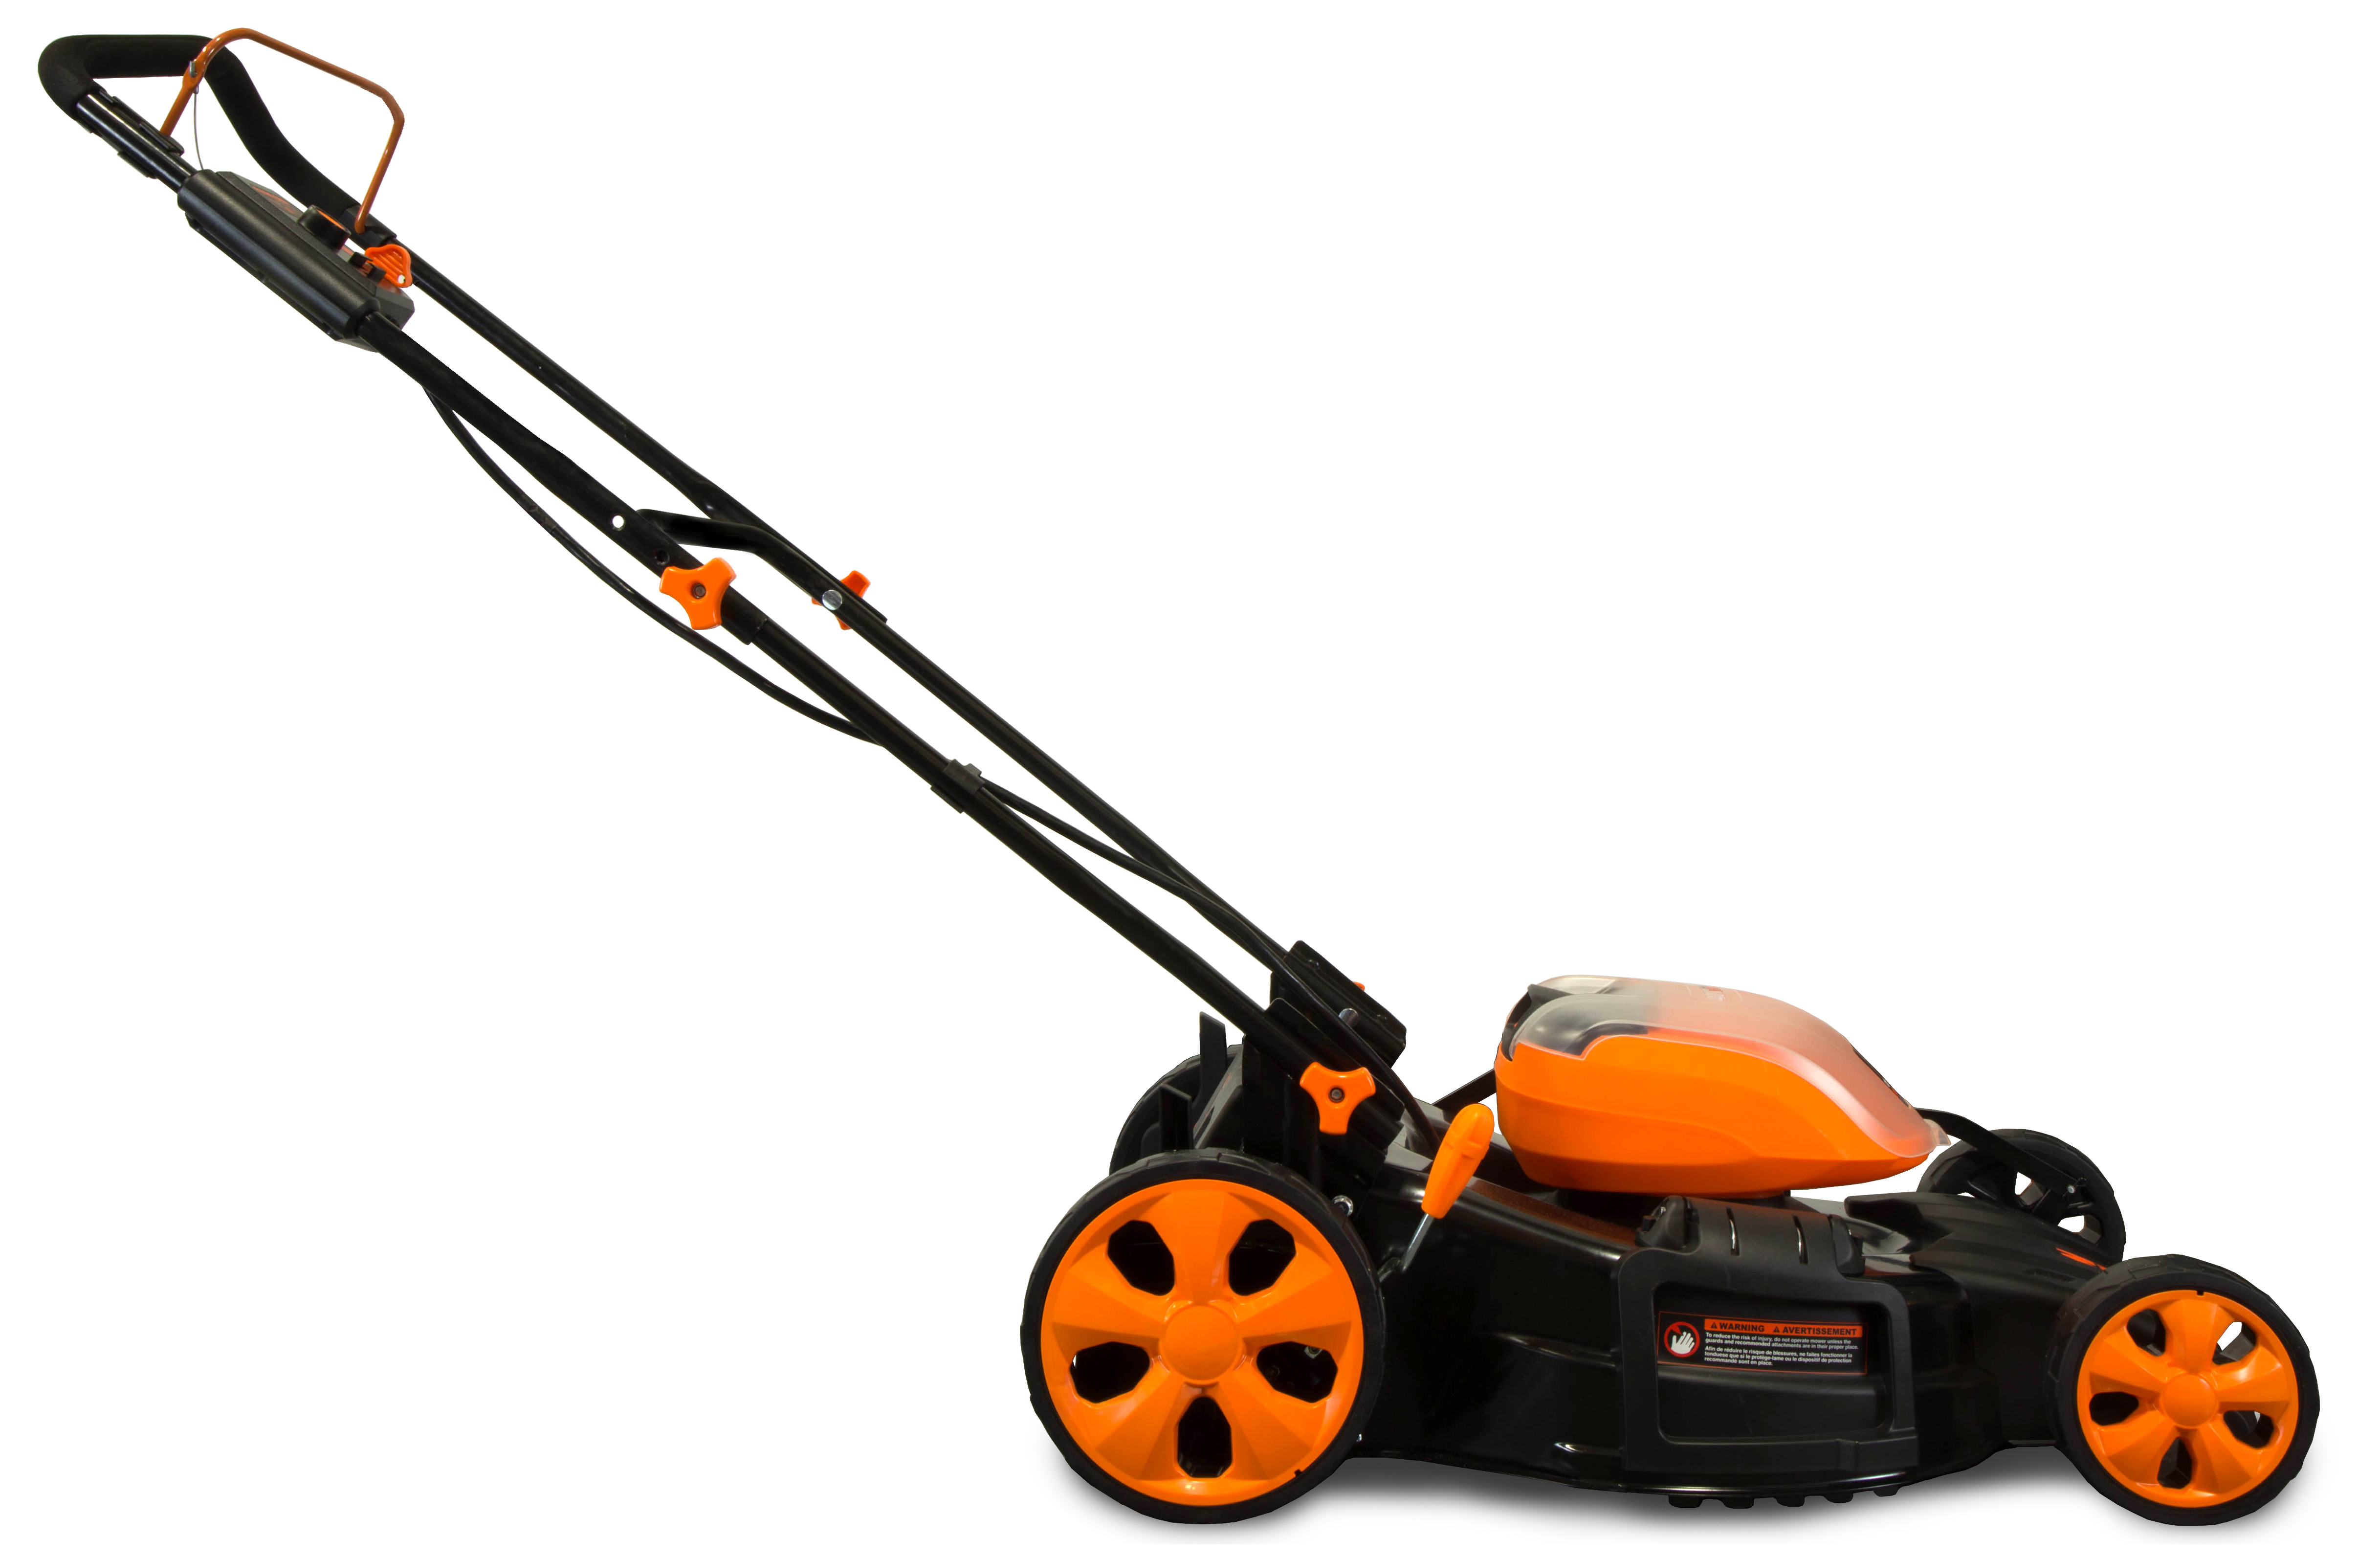 WEN 40V Max Lithium Ion 21-Inch Cordless 3-in-1 Lawn Mower with Two Batteries, 16-Gallon Bag and Charger - image 2 of 8